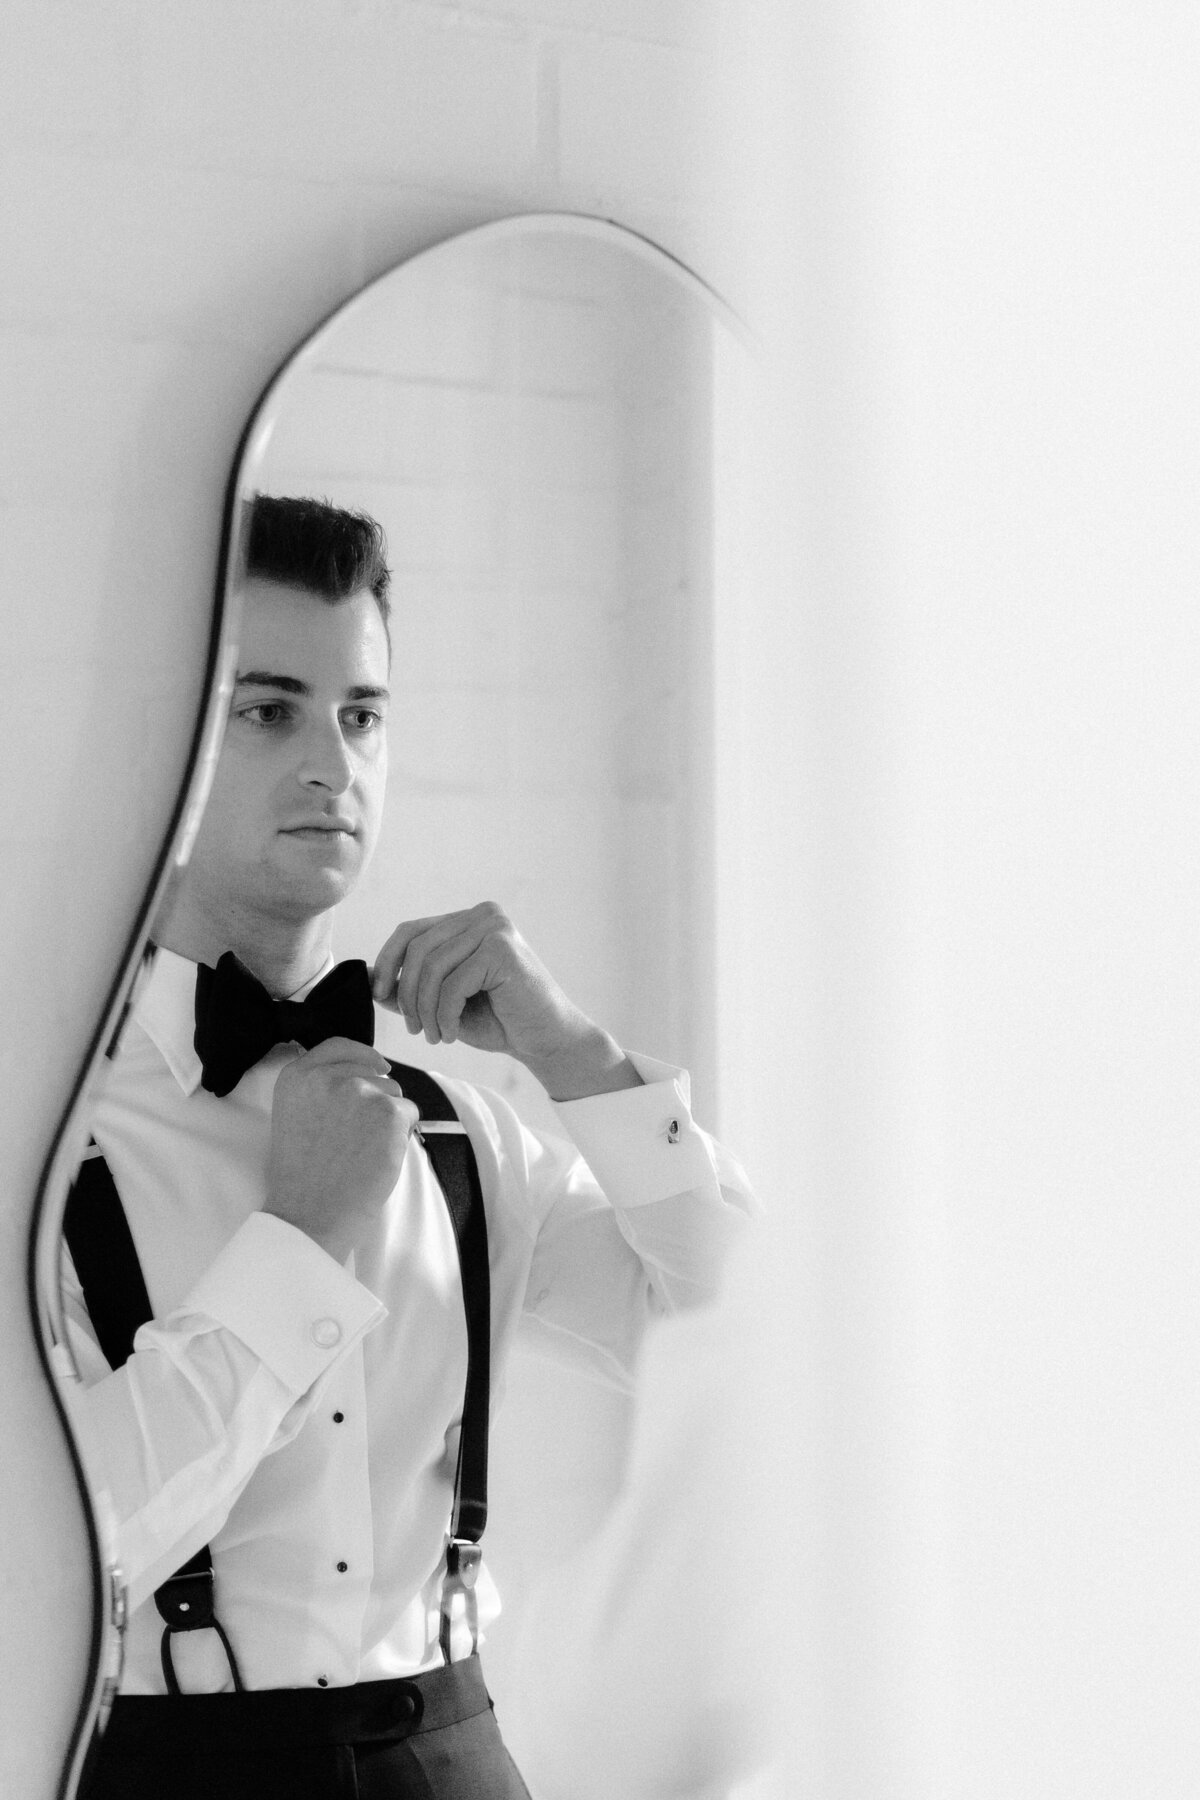 A groom fixing his bow tie in front of a mirror.